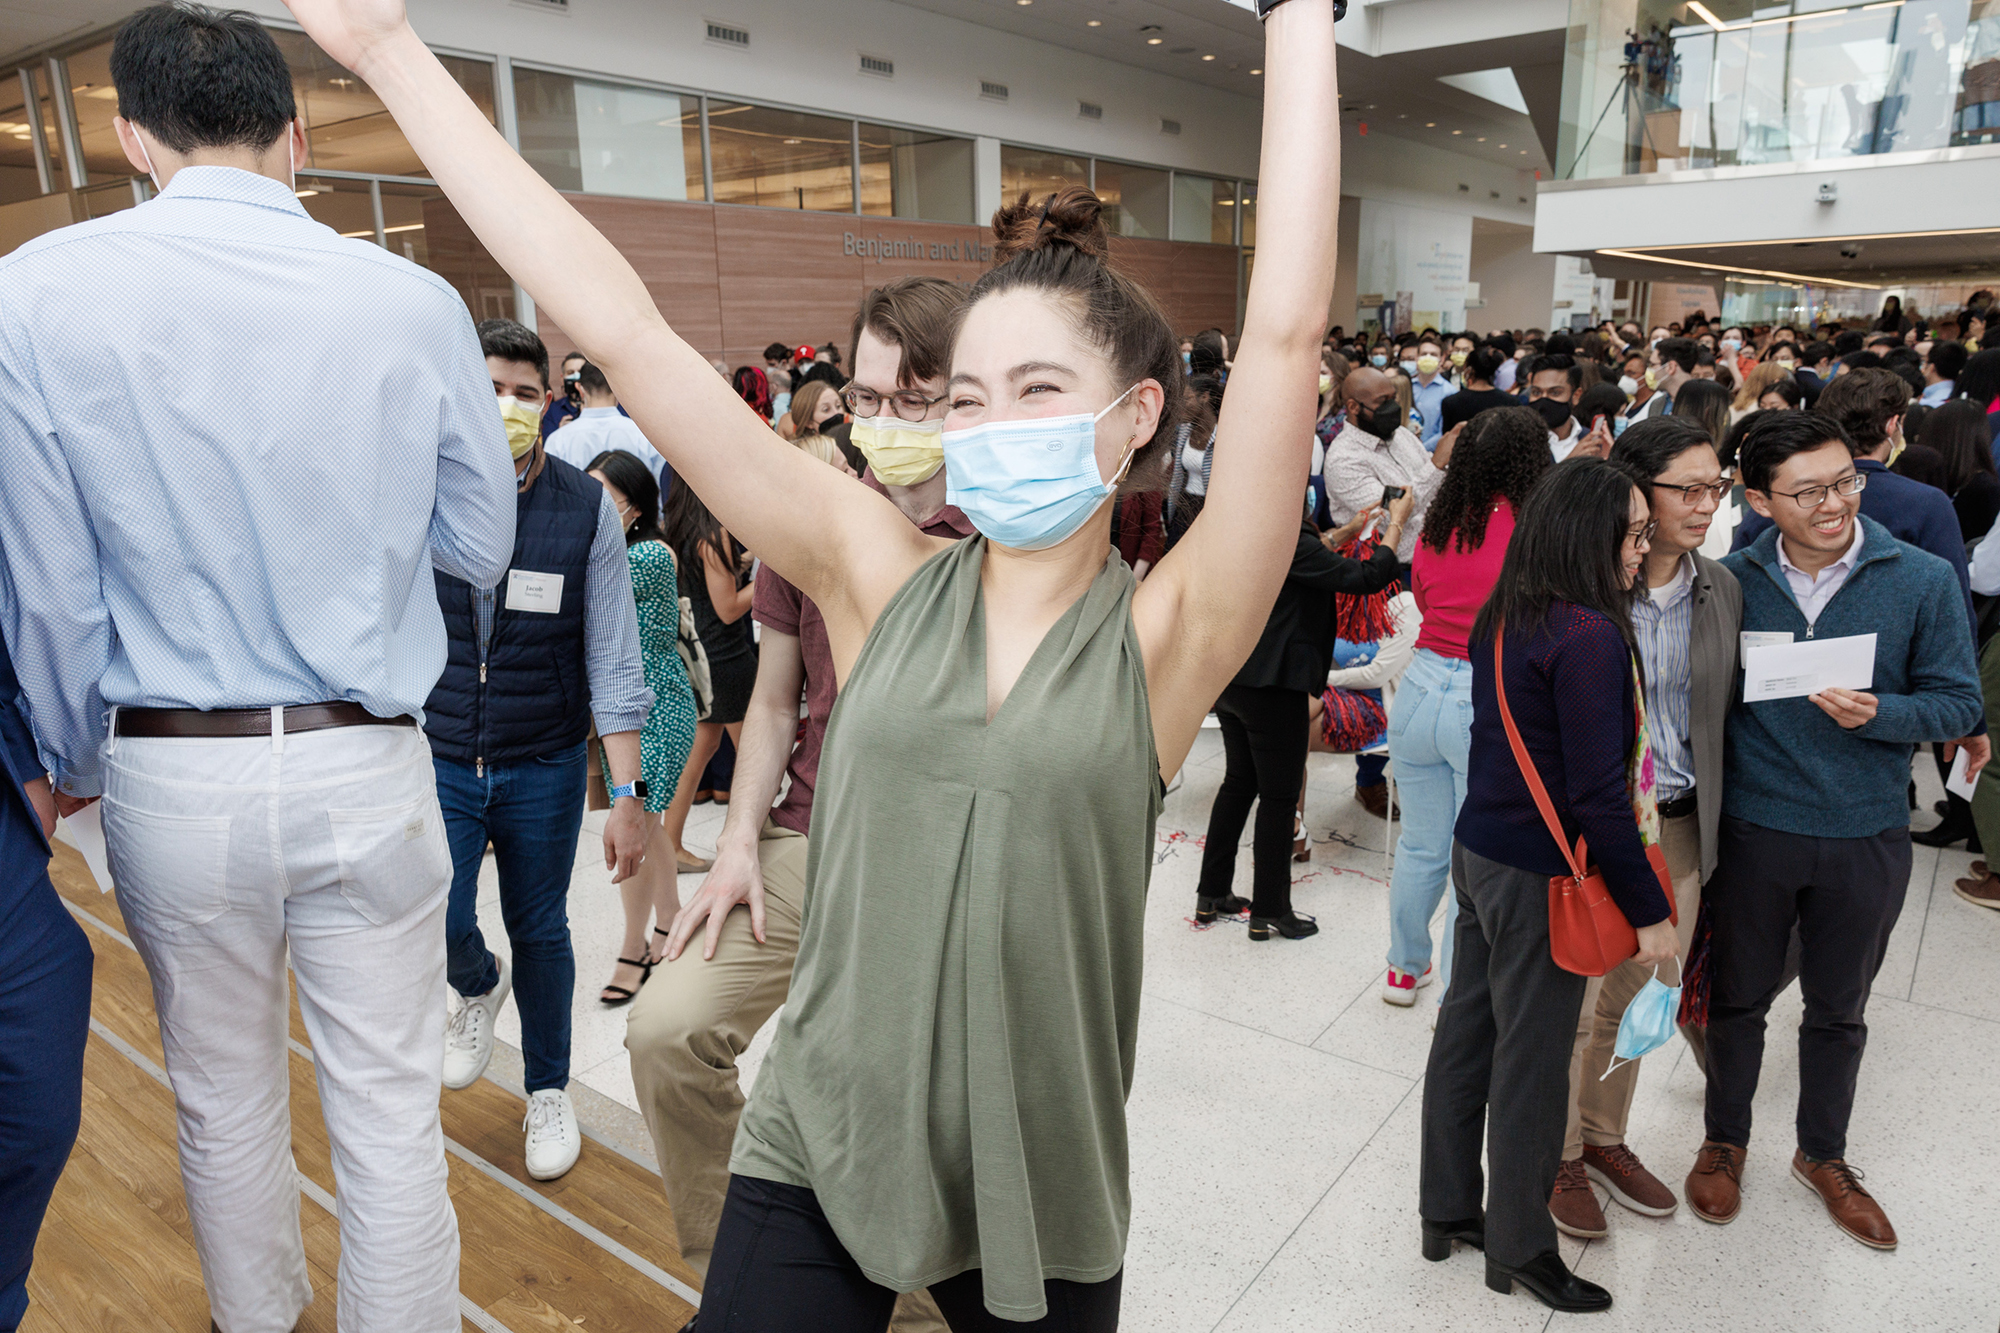 A person celebrating in the atrium at Penn Med's Match Day.